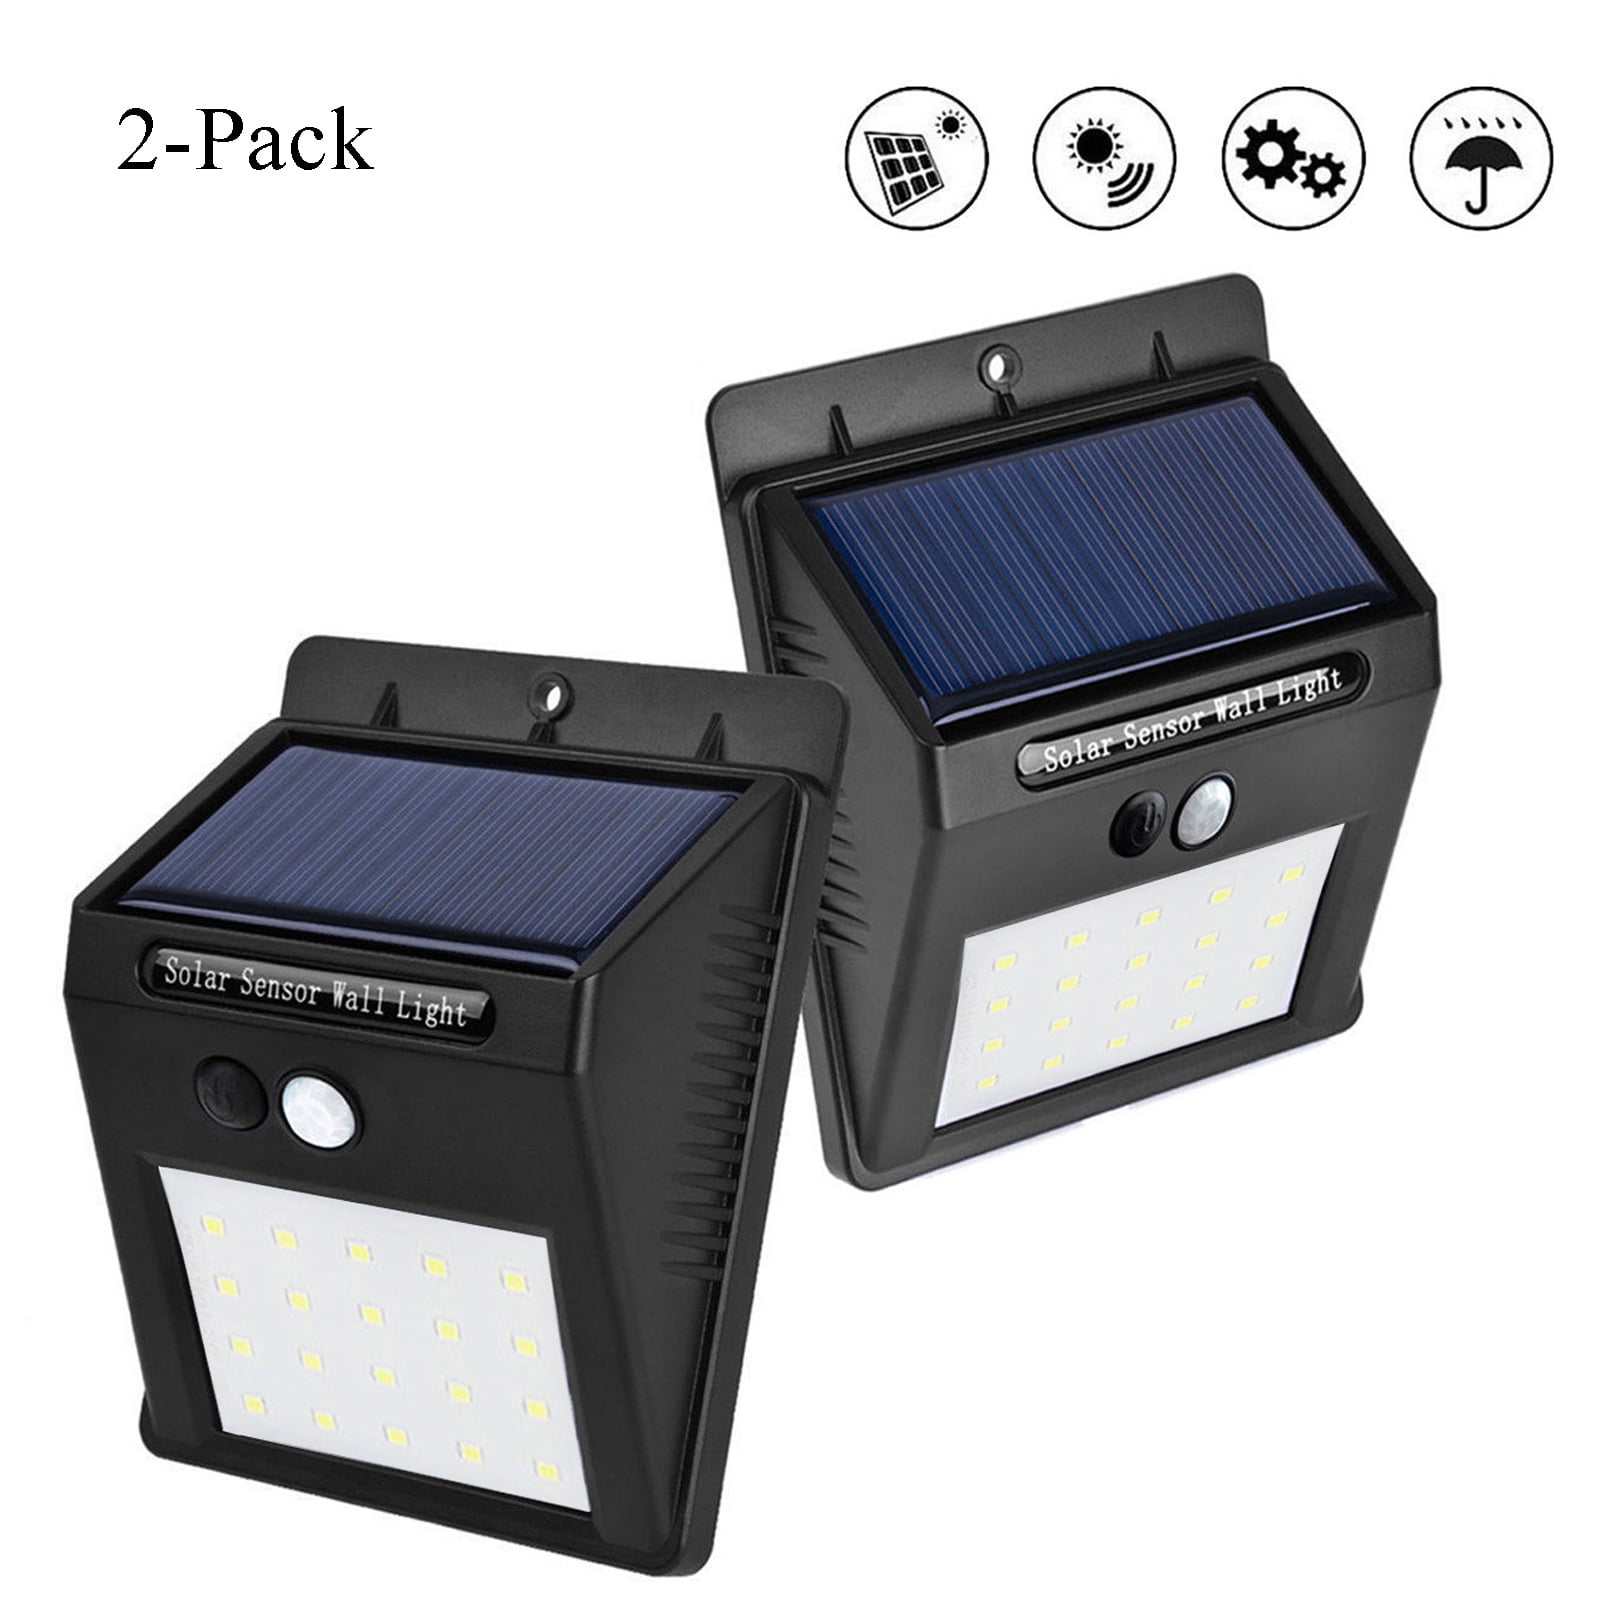 (2 Pack) Solar Outdoor Lights, 20 LED Waterproof Solar Powered Motion Sensor Light with 3 Modes